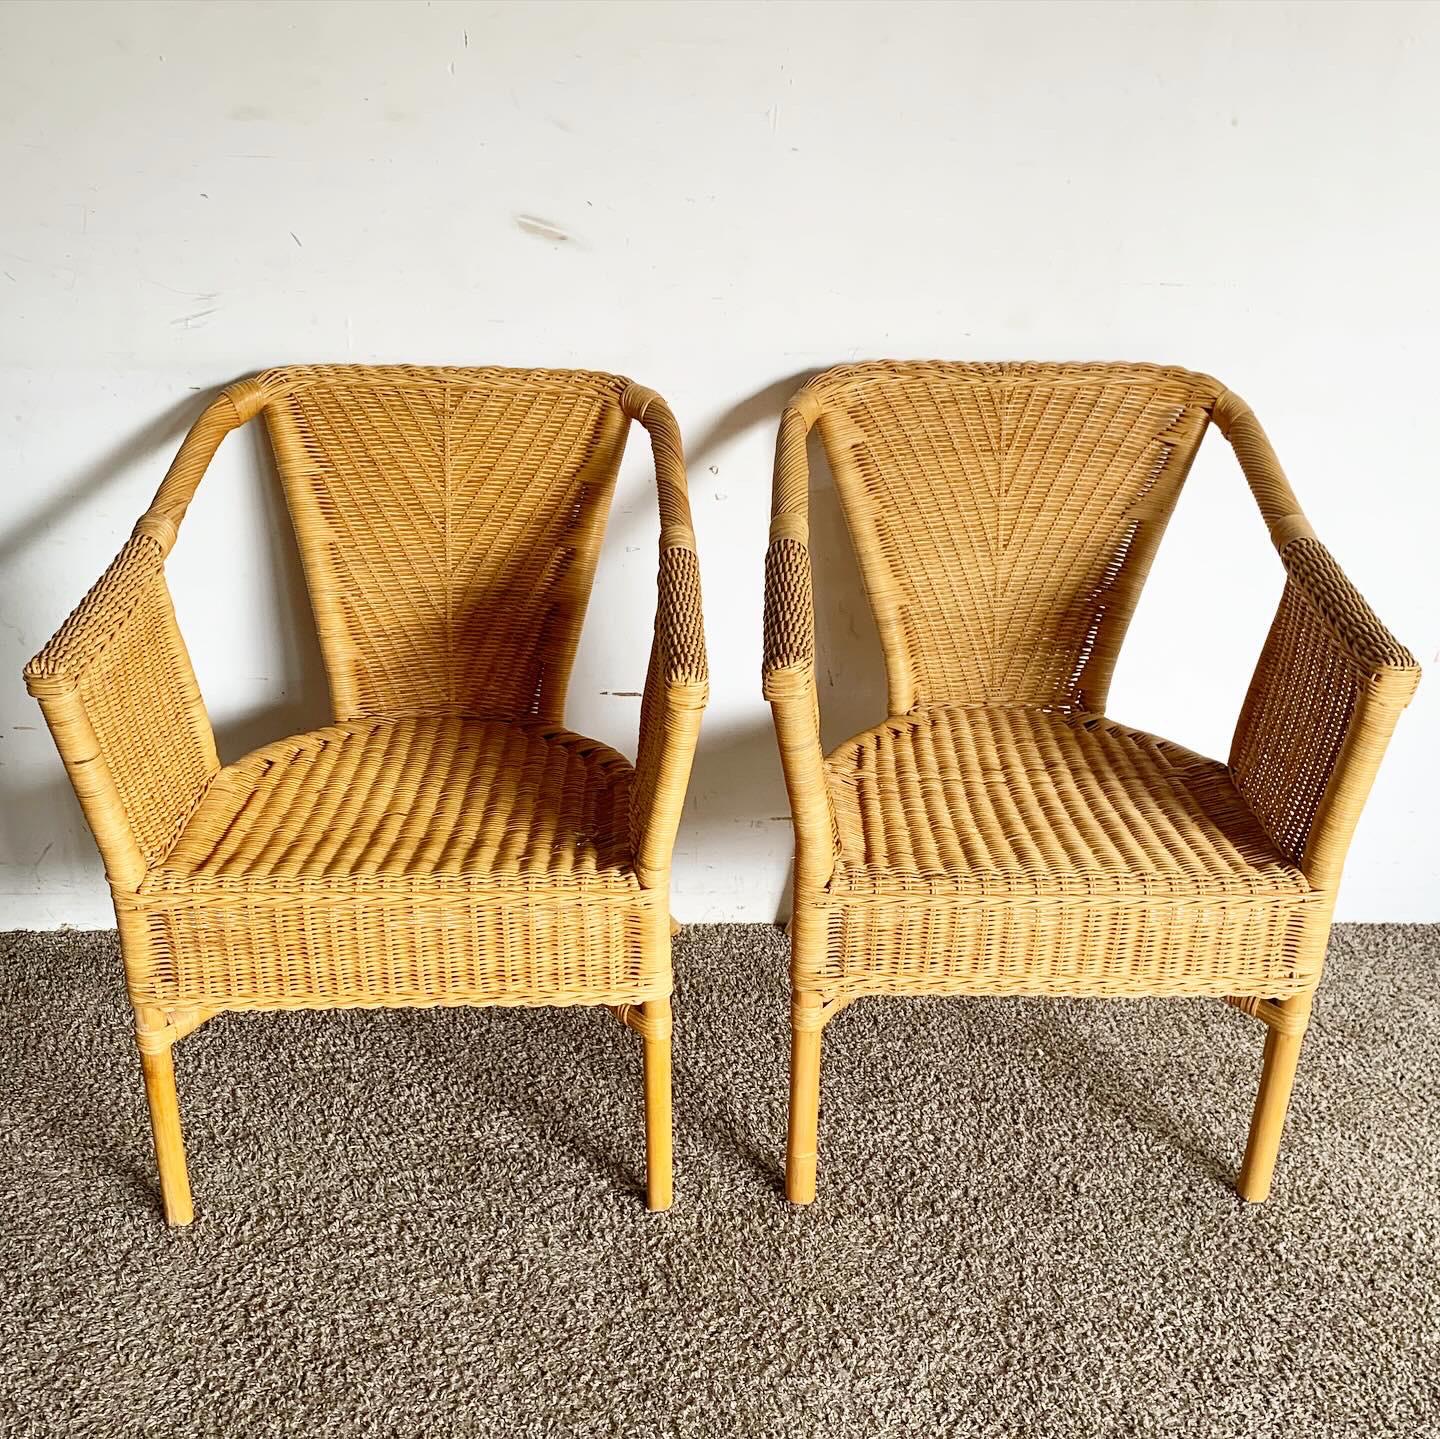 Bohemian Boho Chic Wicker and Rattan Dining Arm Chairs - Set of 4 For Sale